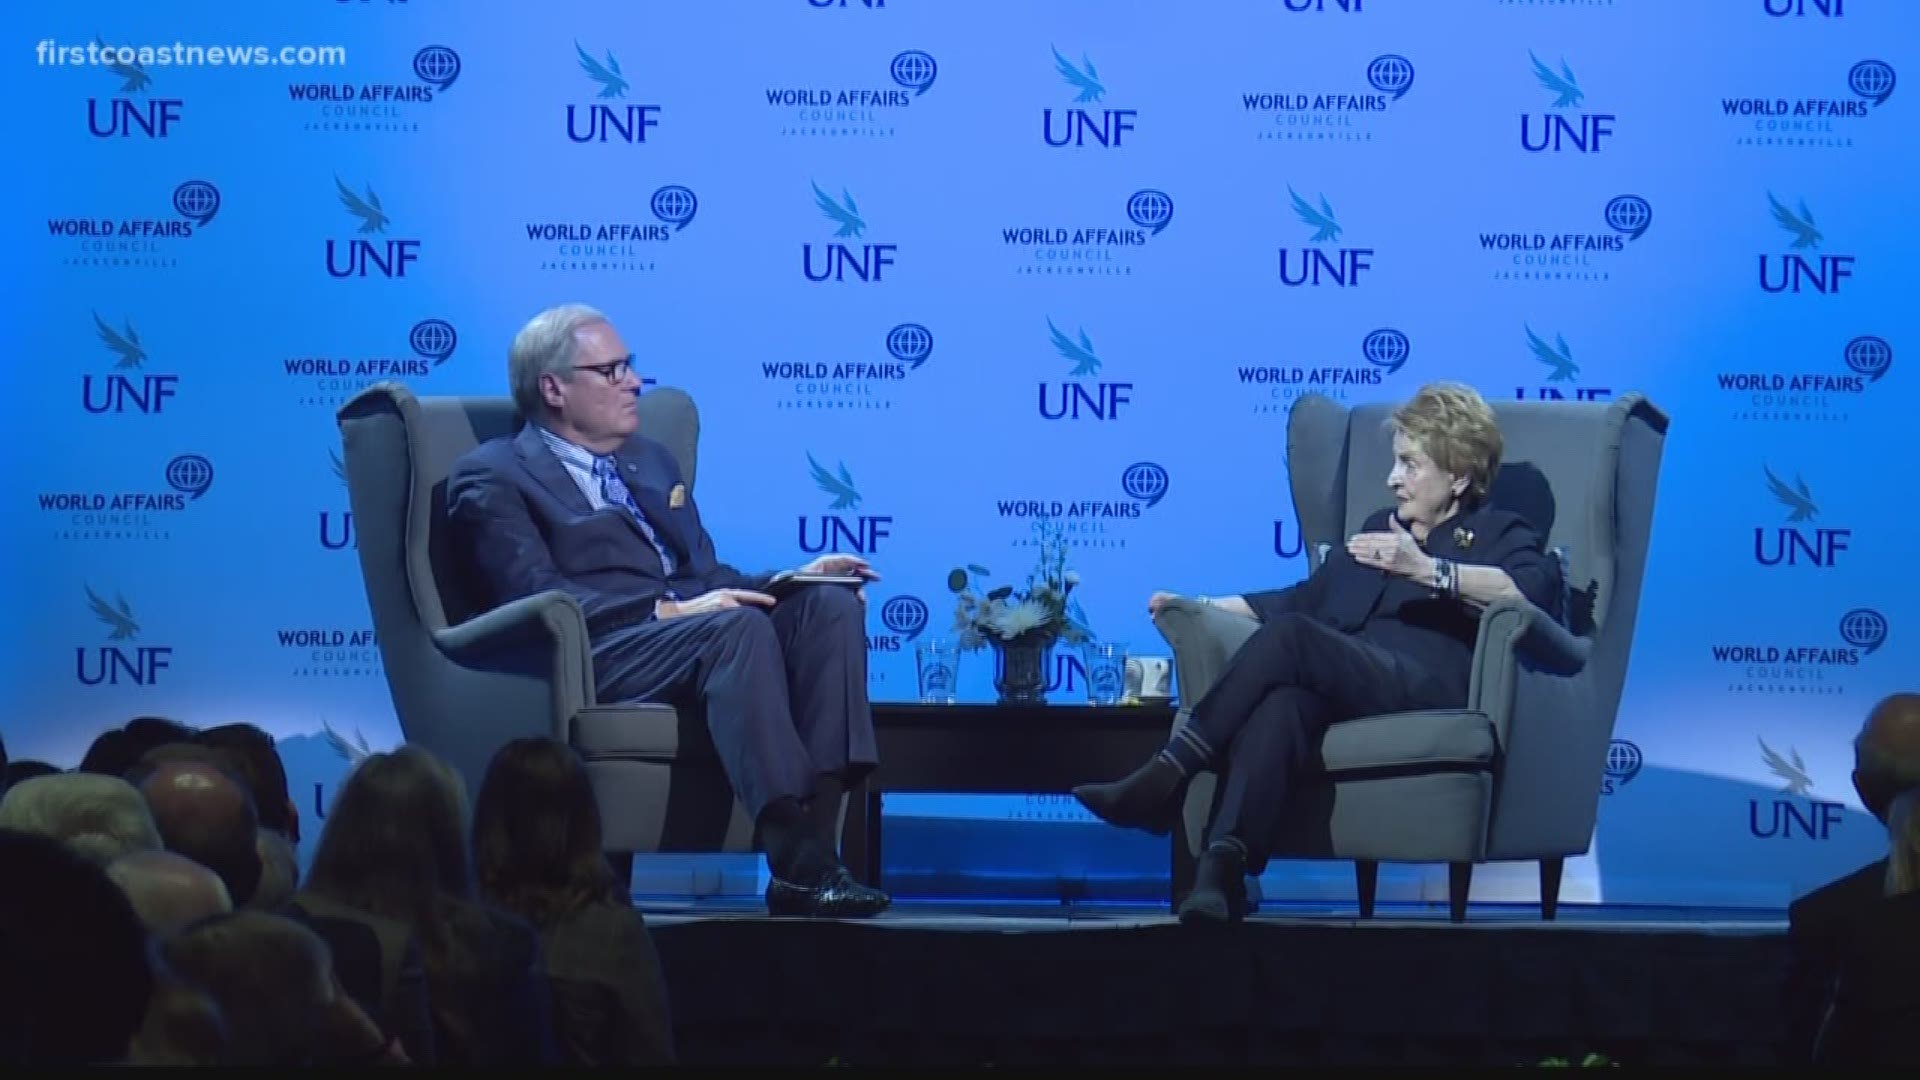 Former U.S. Secretary of State Madeleine Albright visited the University of North Florida Wednesday, reminiscing about her early years and light moments in office.